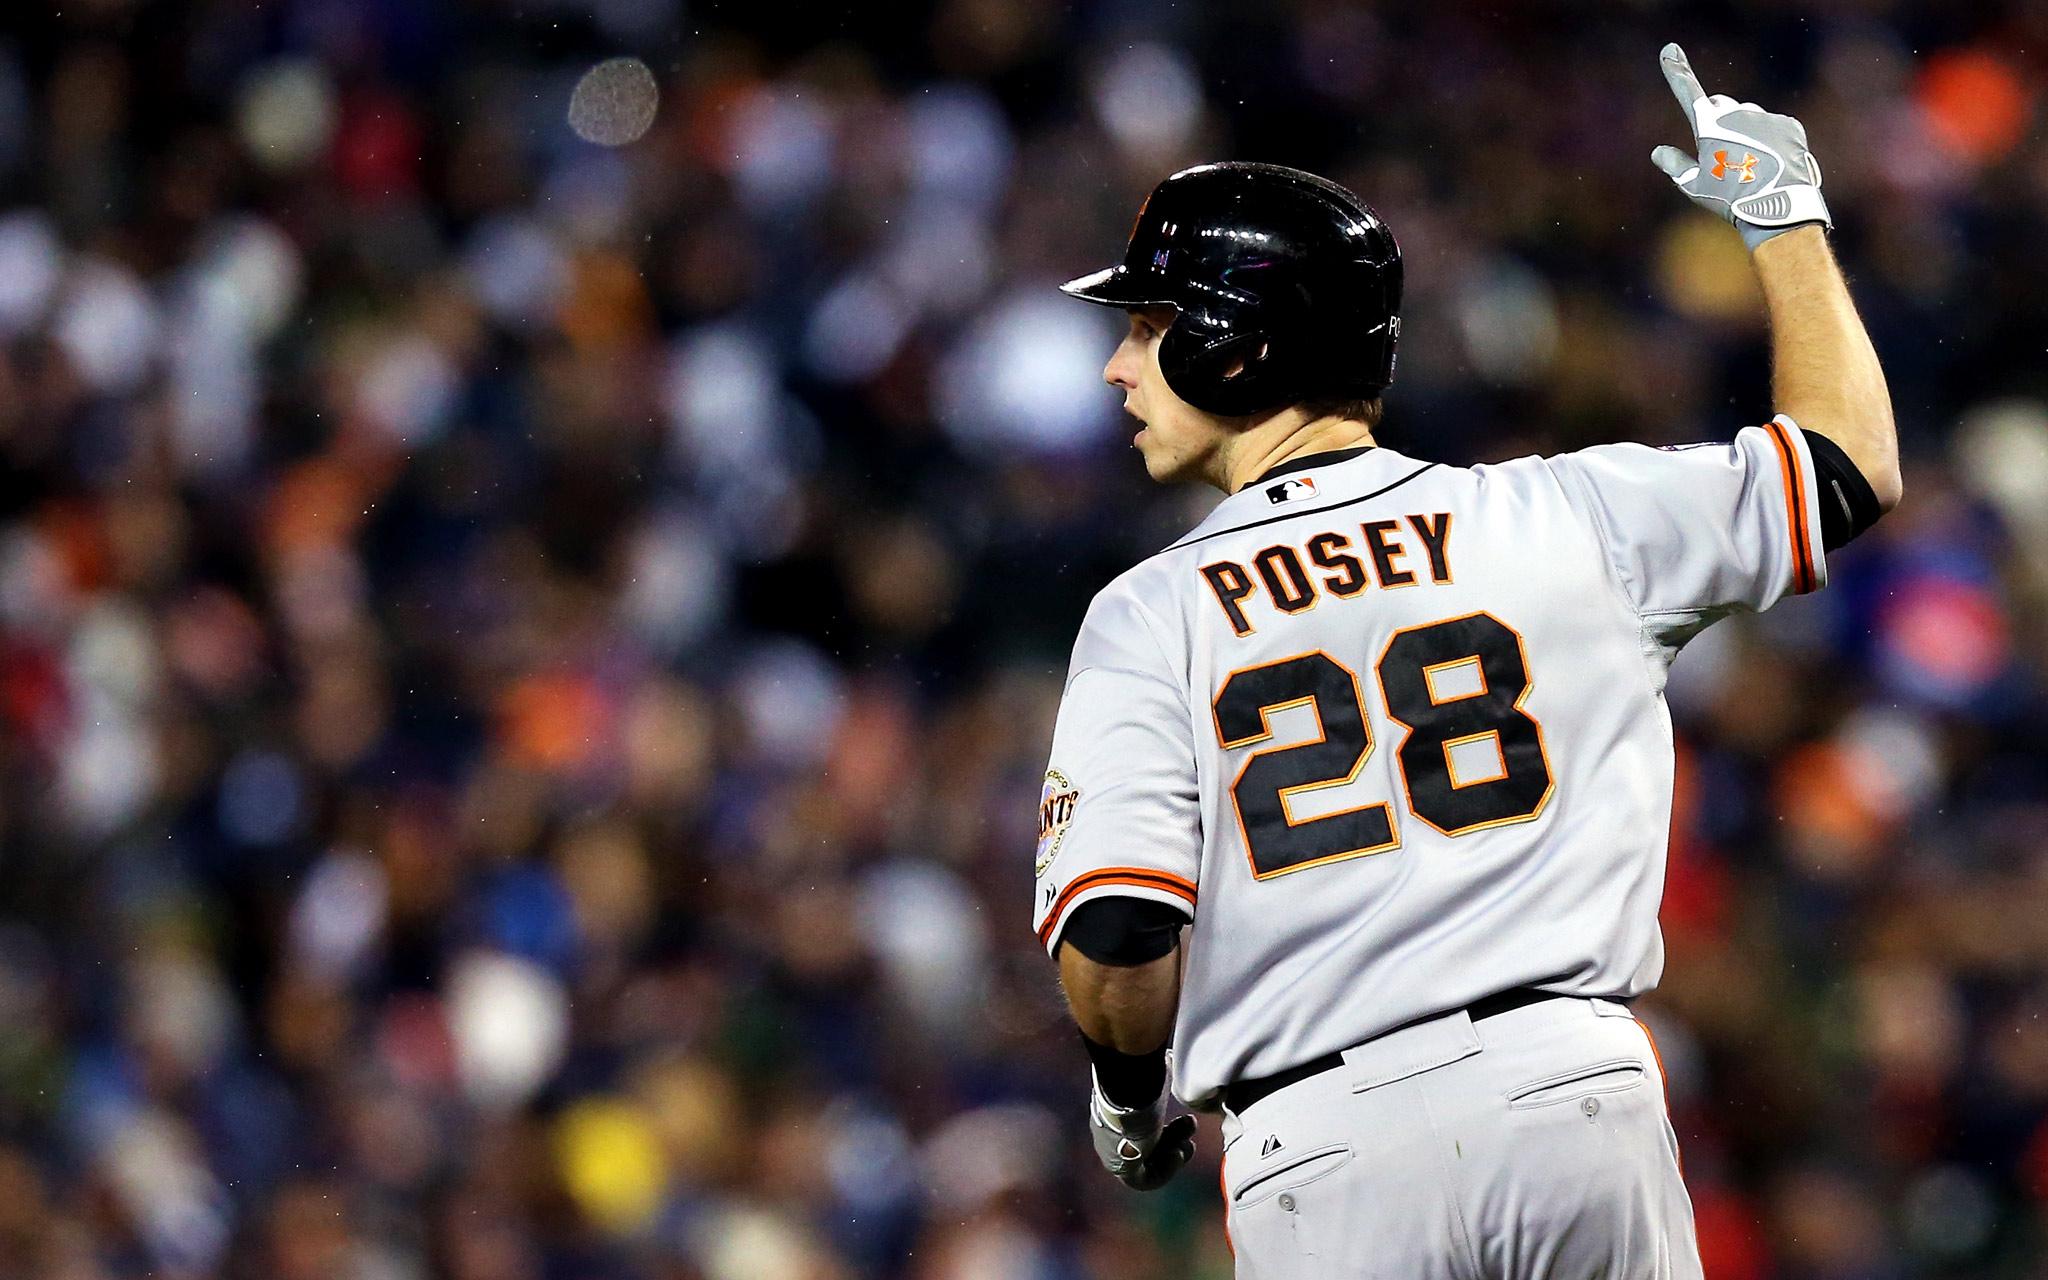   to wish Buster Posey a Happy 28th Birthday! I feel so unaccomplished as a 28 YO now.